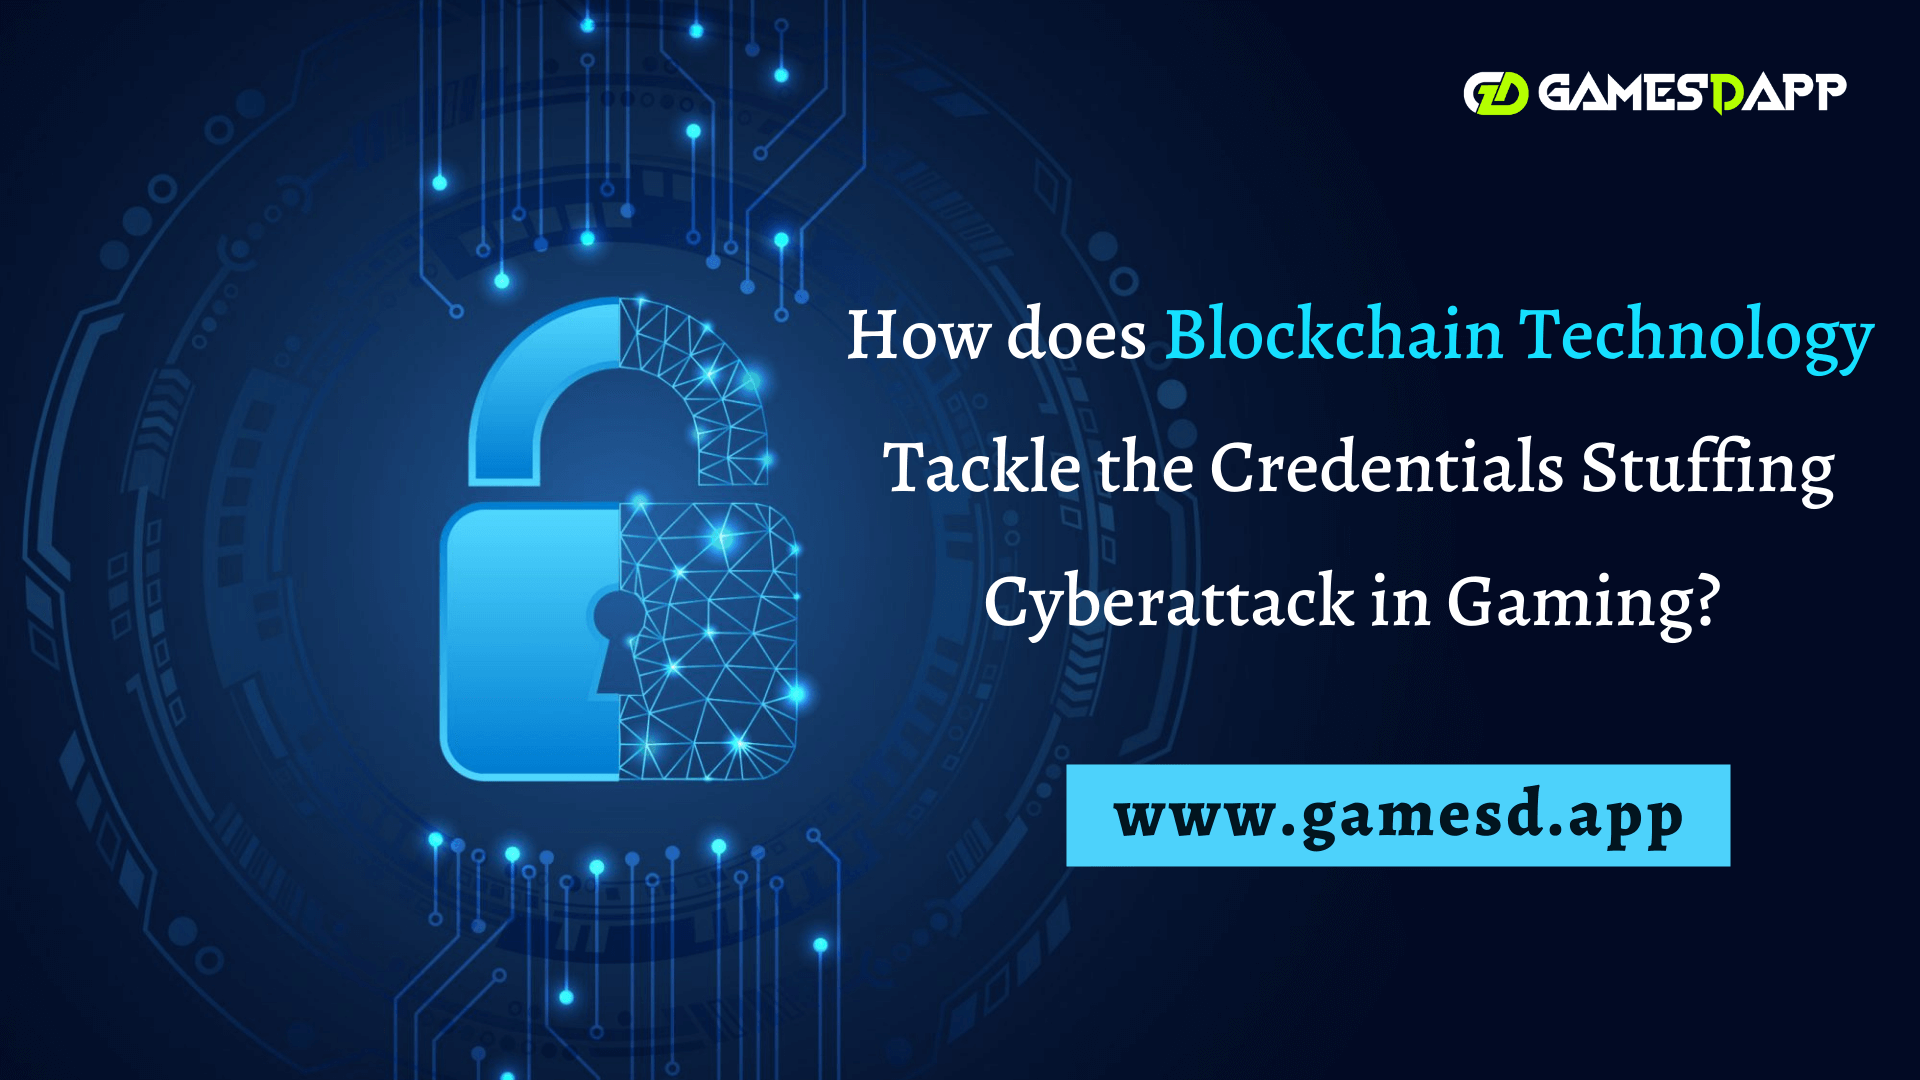 How does Blockchain Technology Tackle the Credentials Stuffing Cyberattack in Gaming?